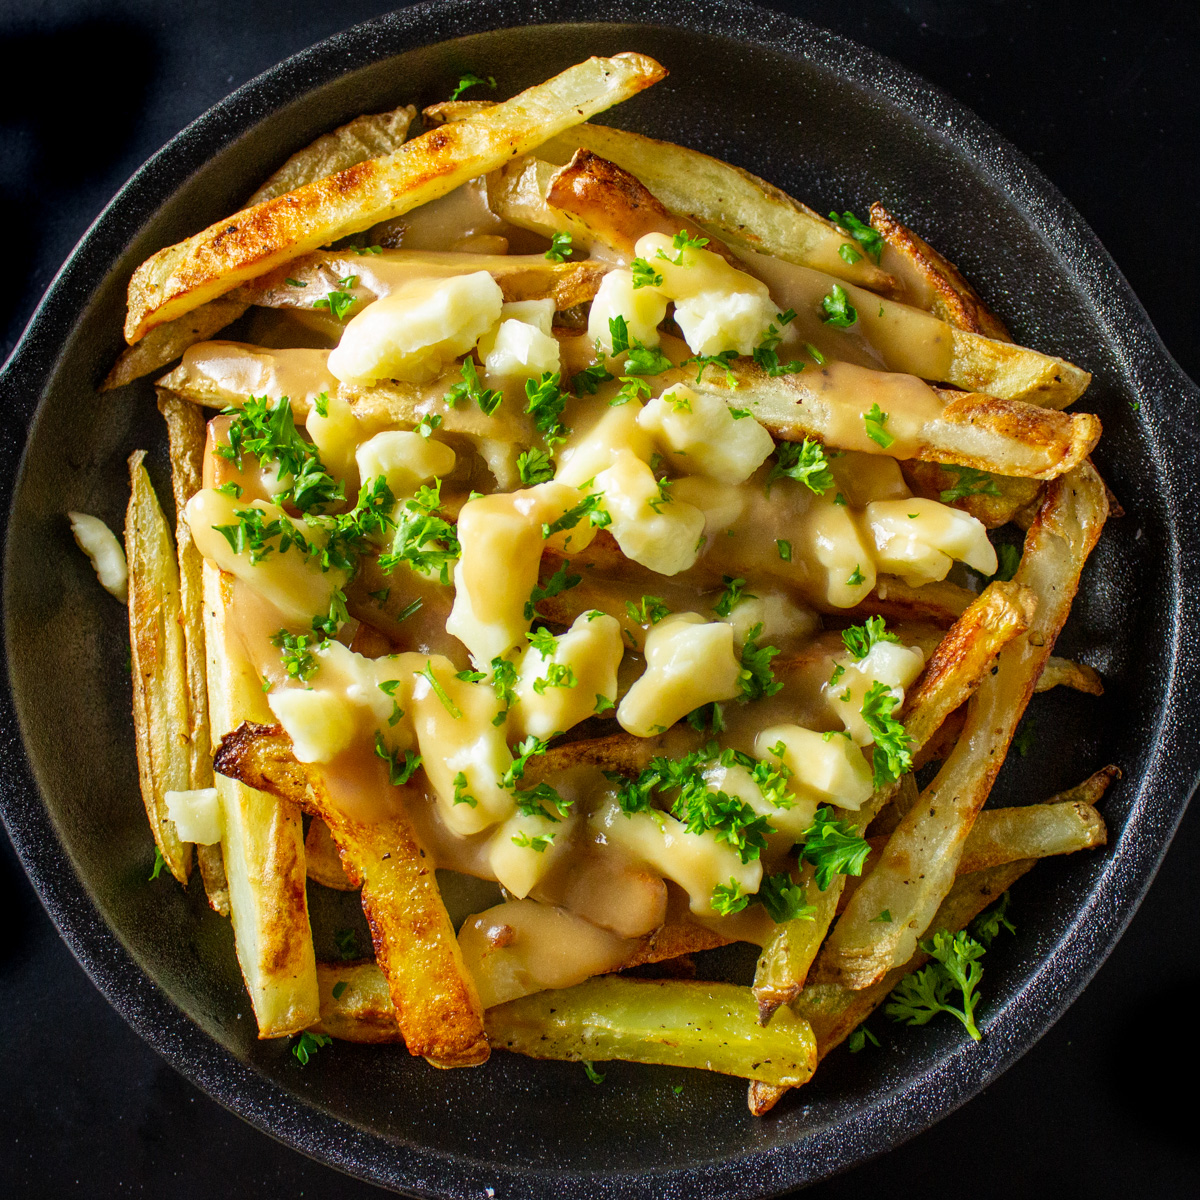 poutine on black plate sprinkled with parsley.